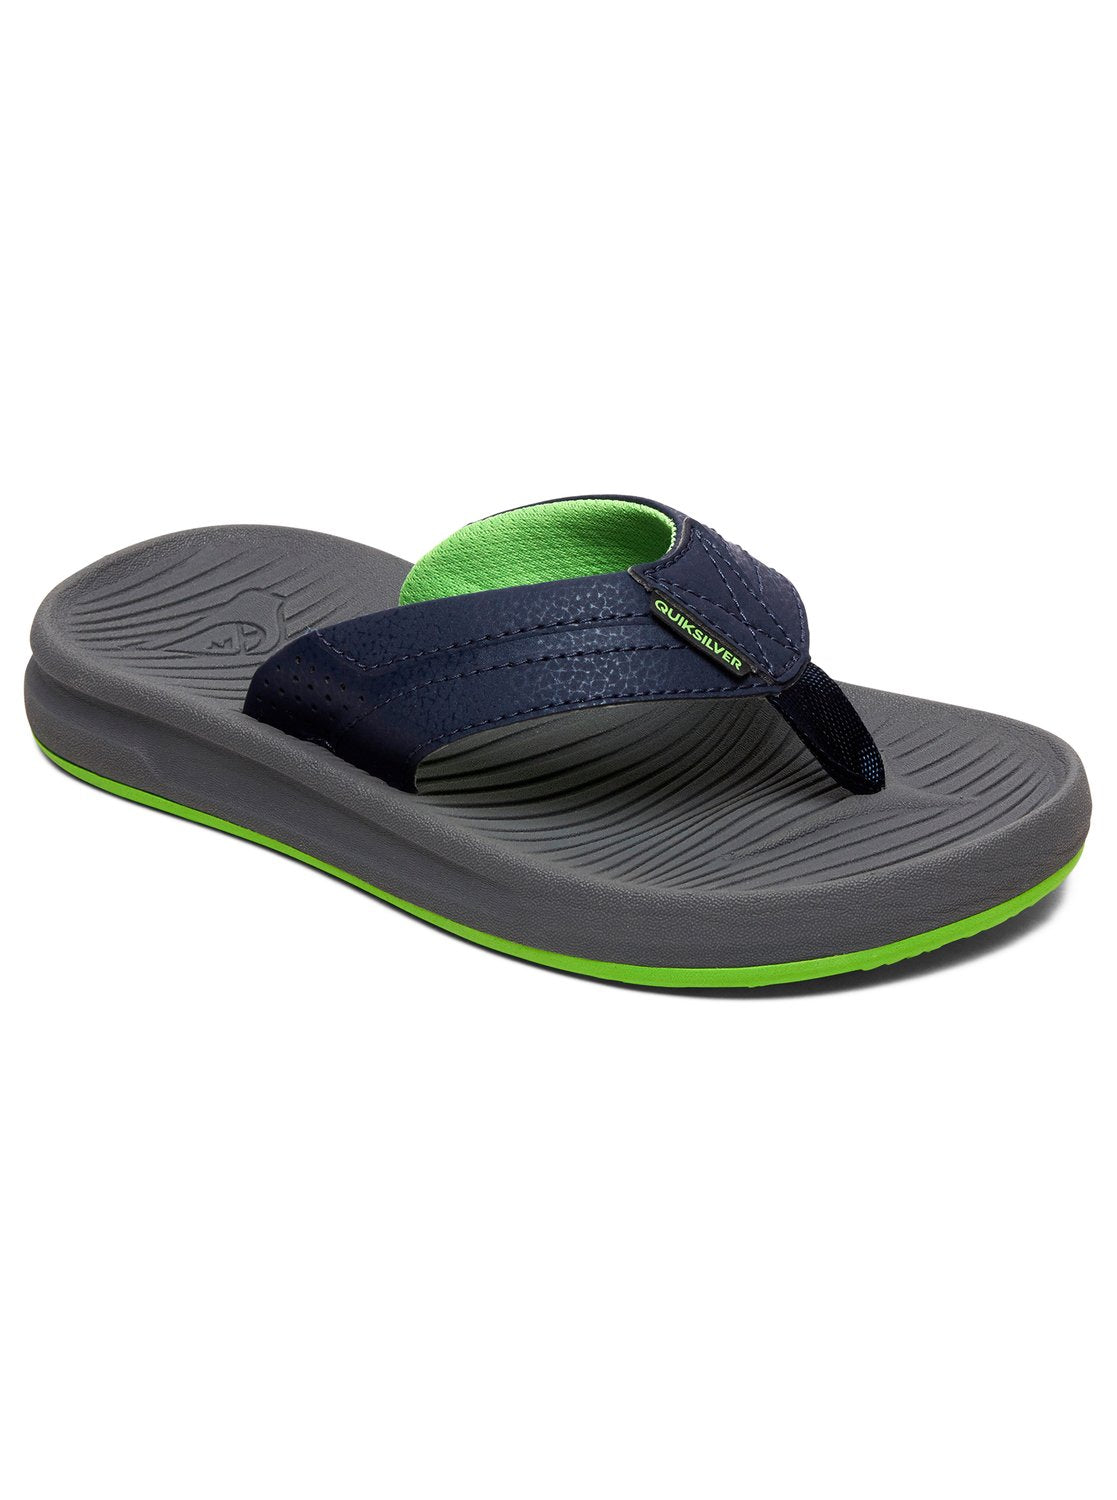 Quiksilver Oasis Youth Sandals XBSB-Blue-Grey-Blue 2 Y